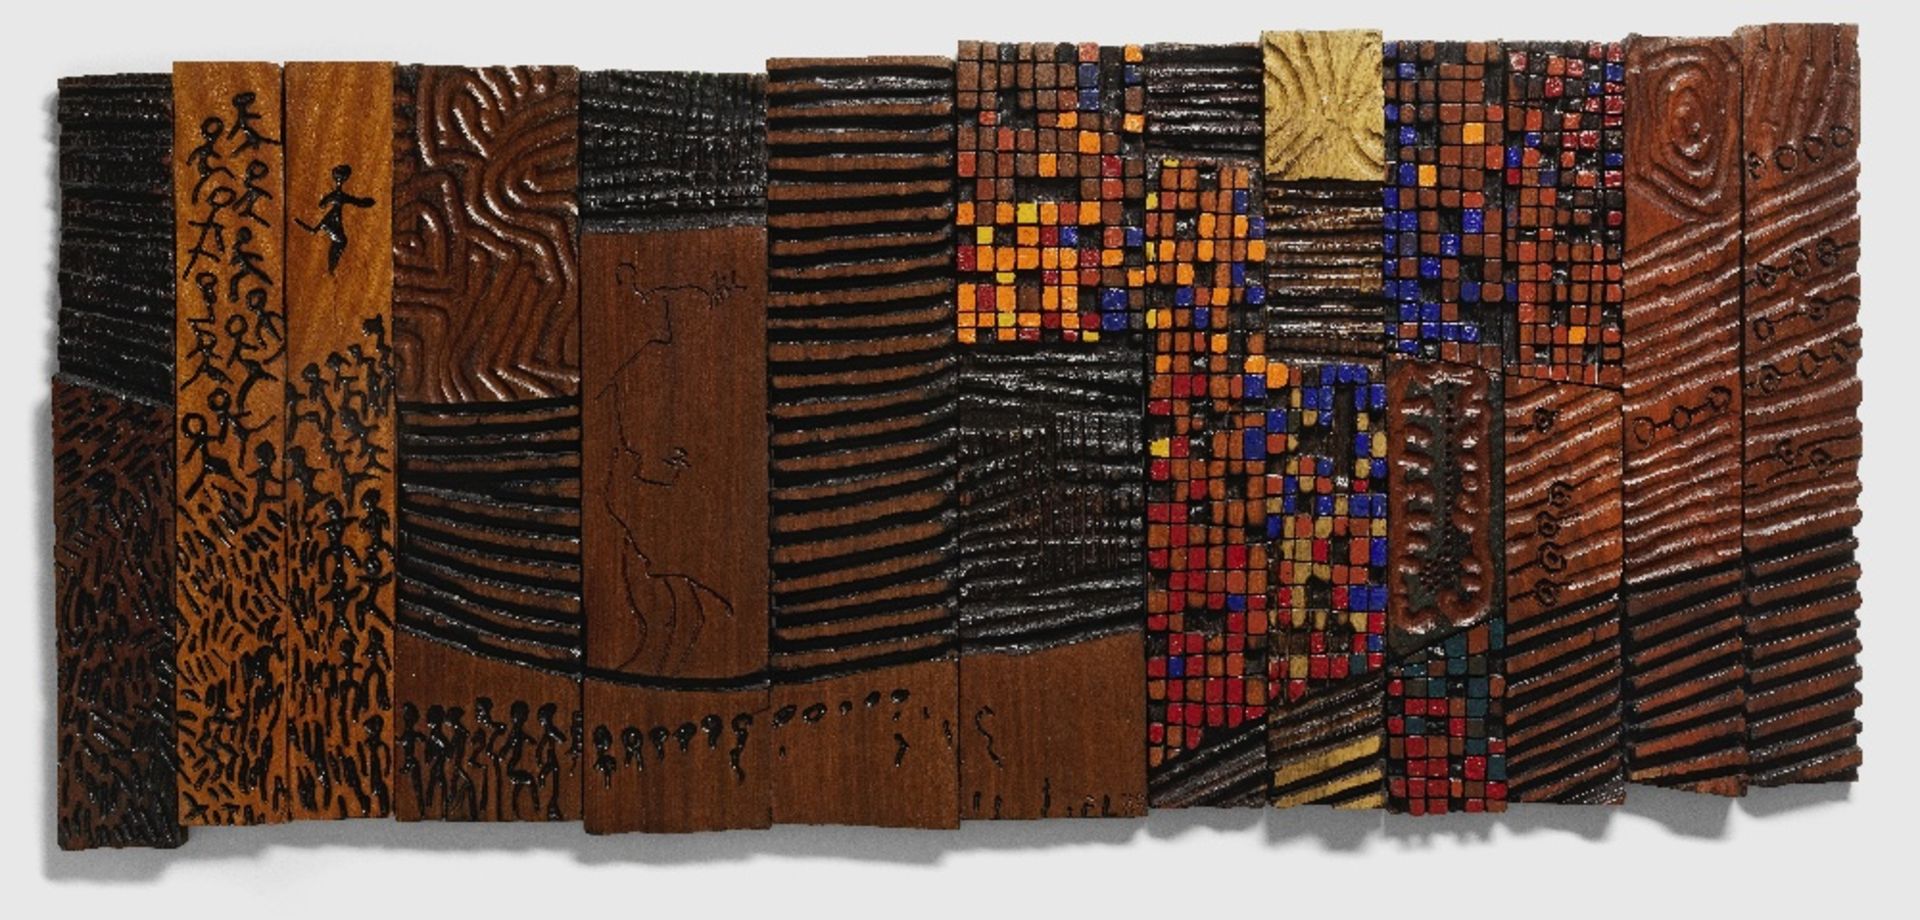 El Anatsui (Ghanaian, born 1944) Towards the Fire Bodies Unknown, 1989, 143 x 61 cm, in 13 pieces